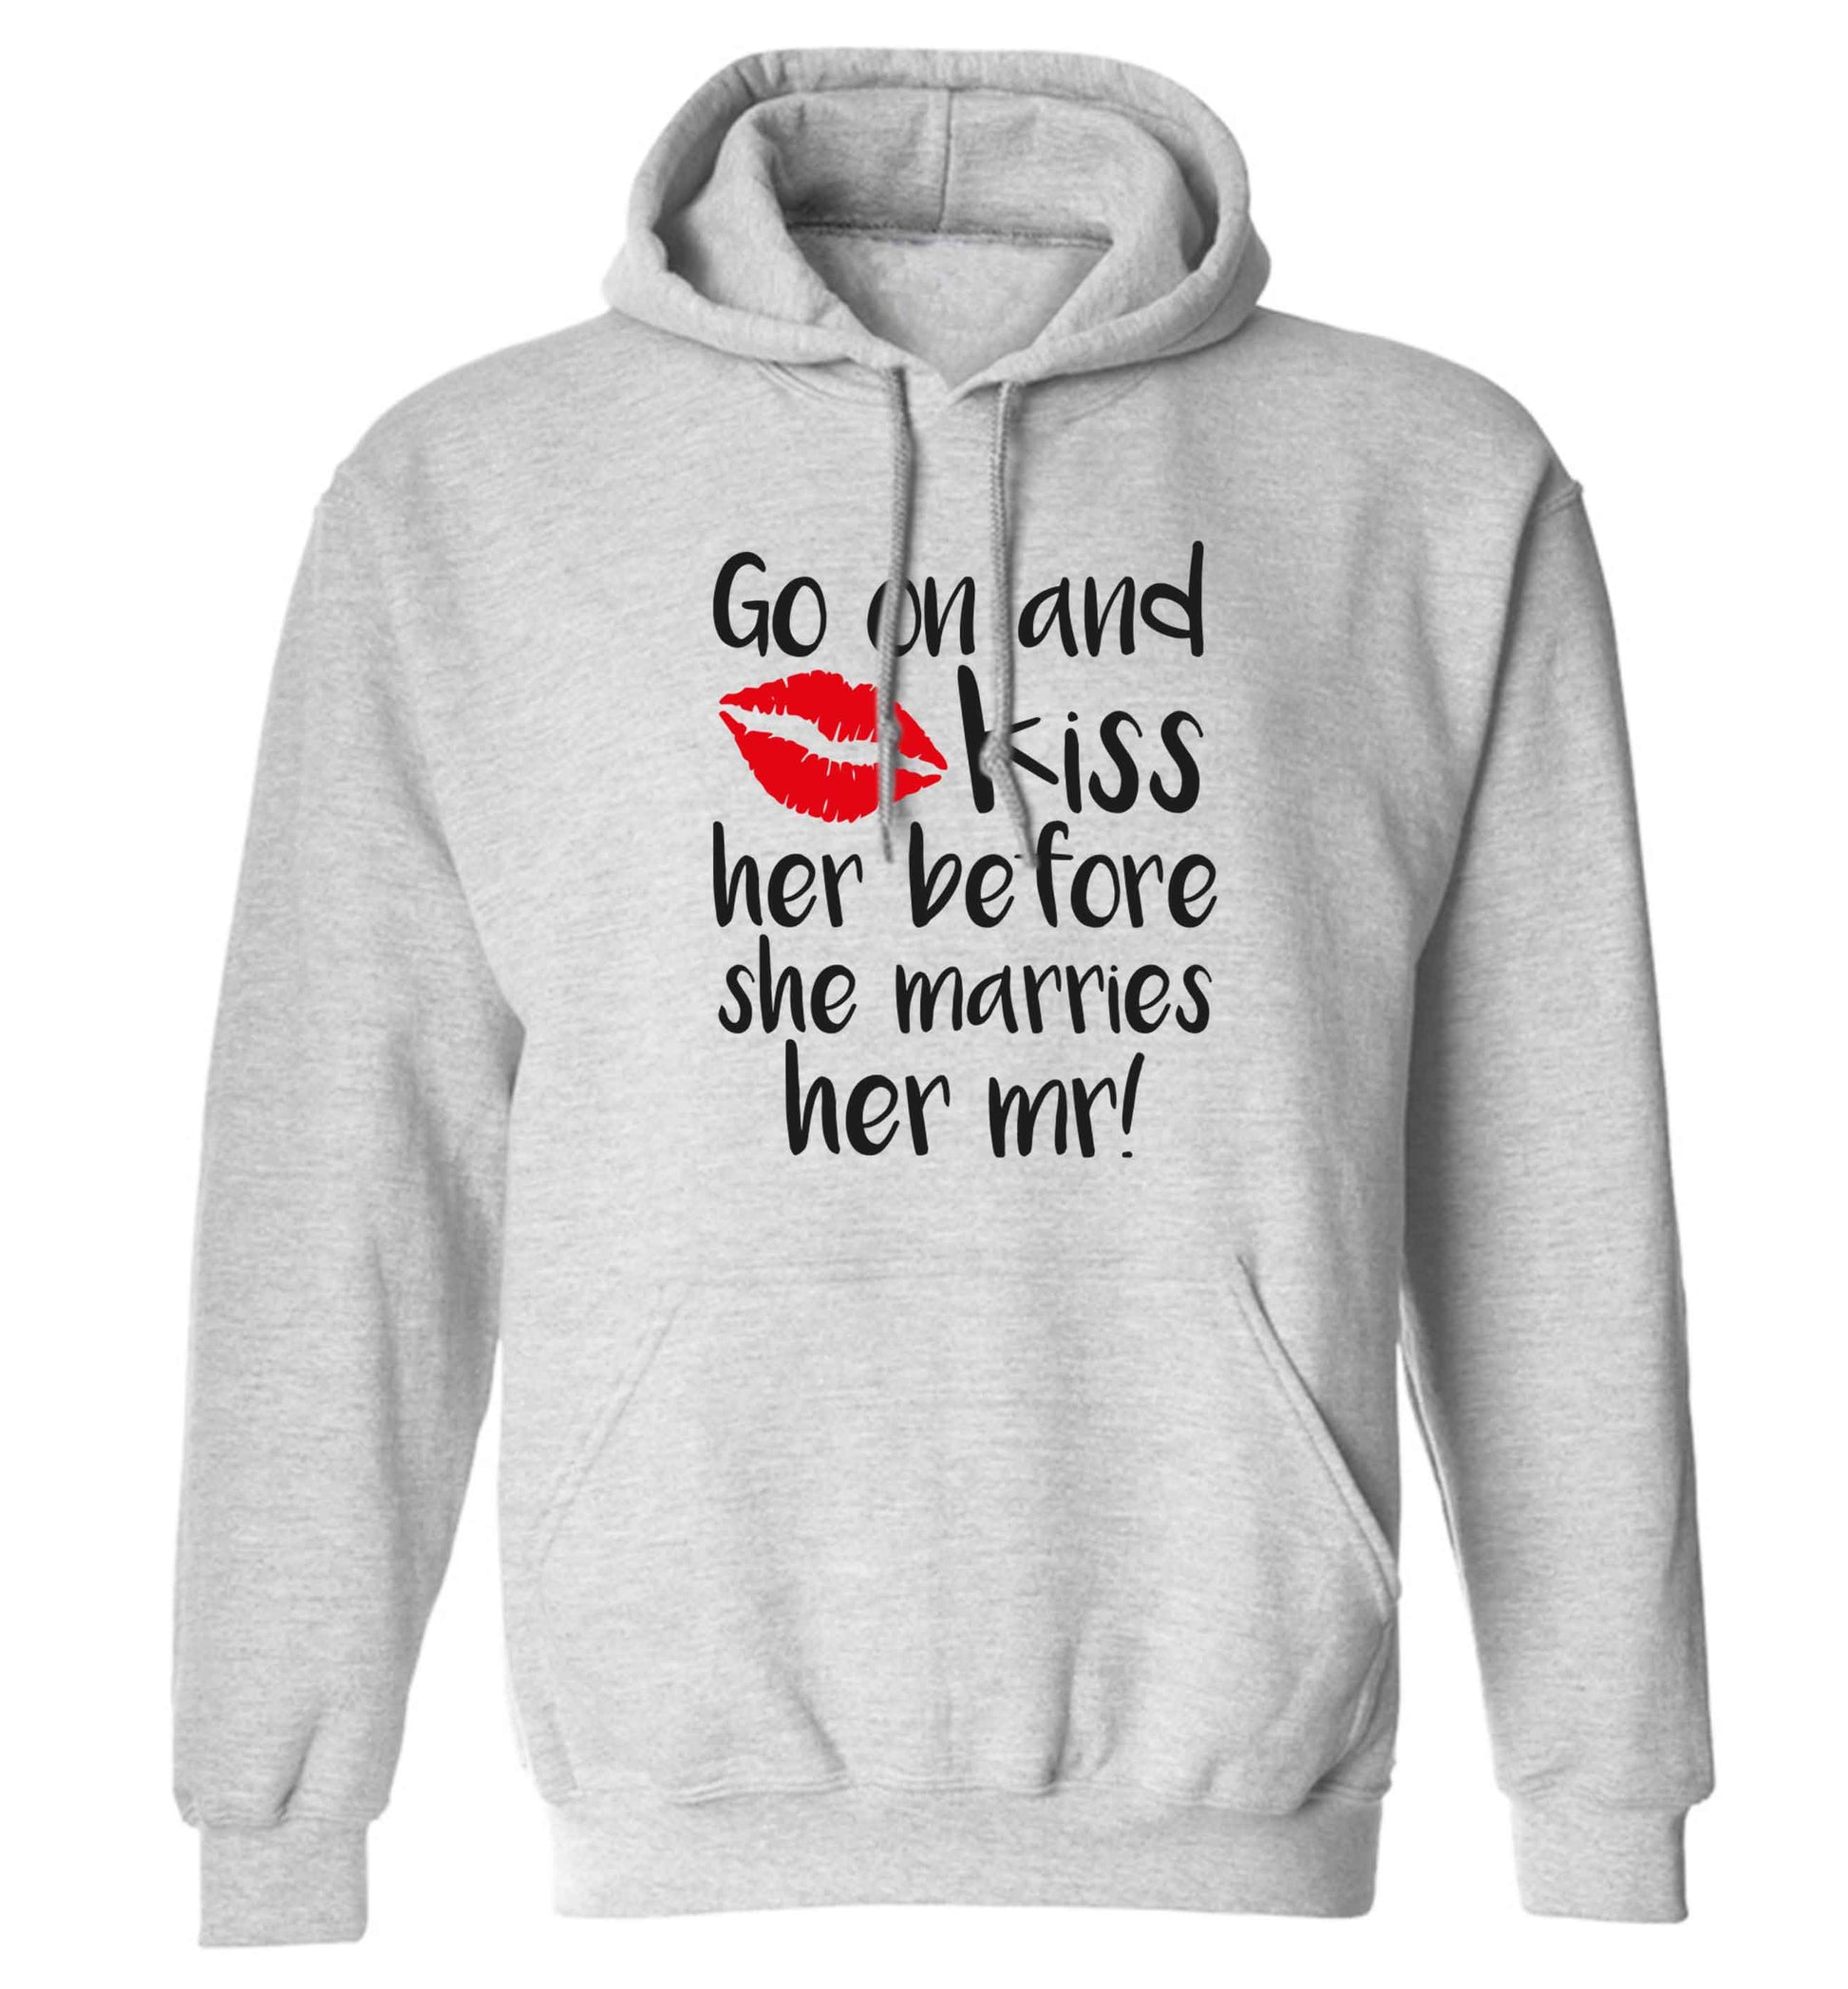 Kiss her before she marries her mr! adults unisex grey hoodie 2XL